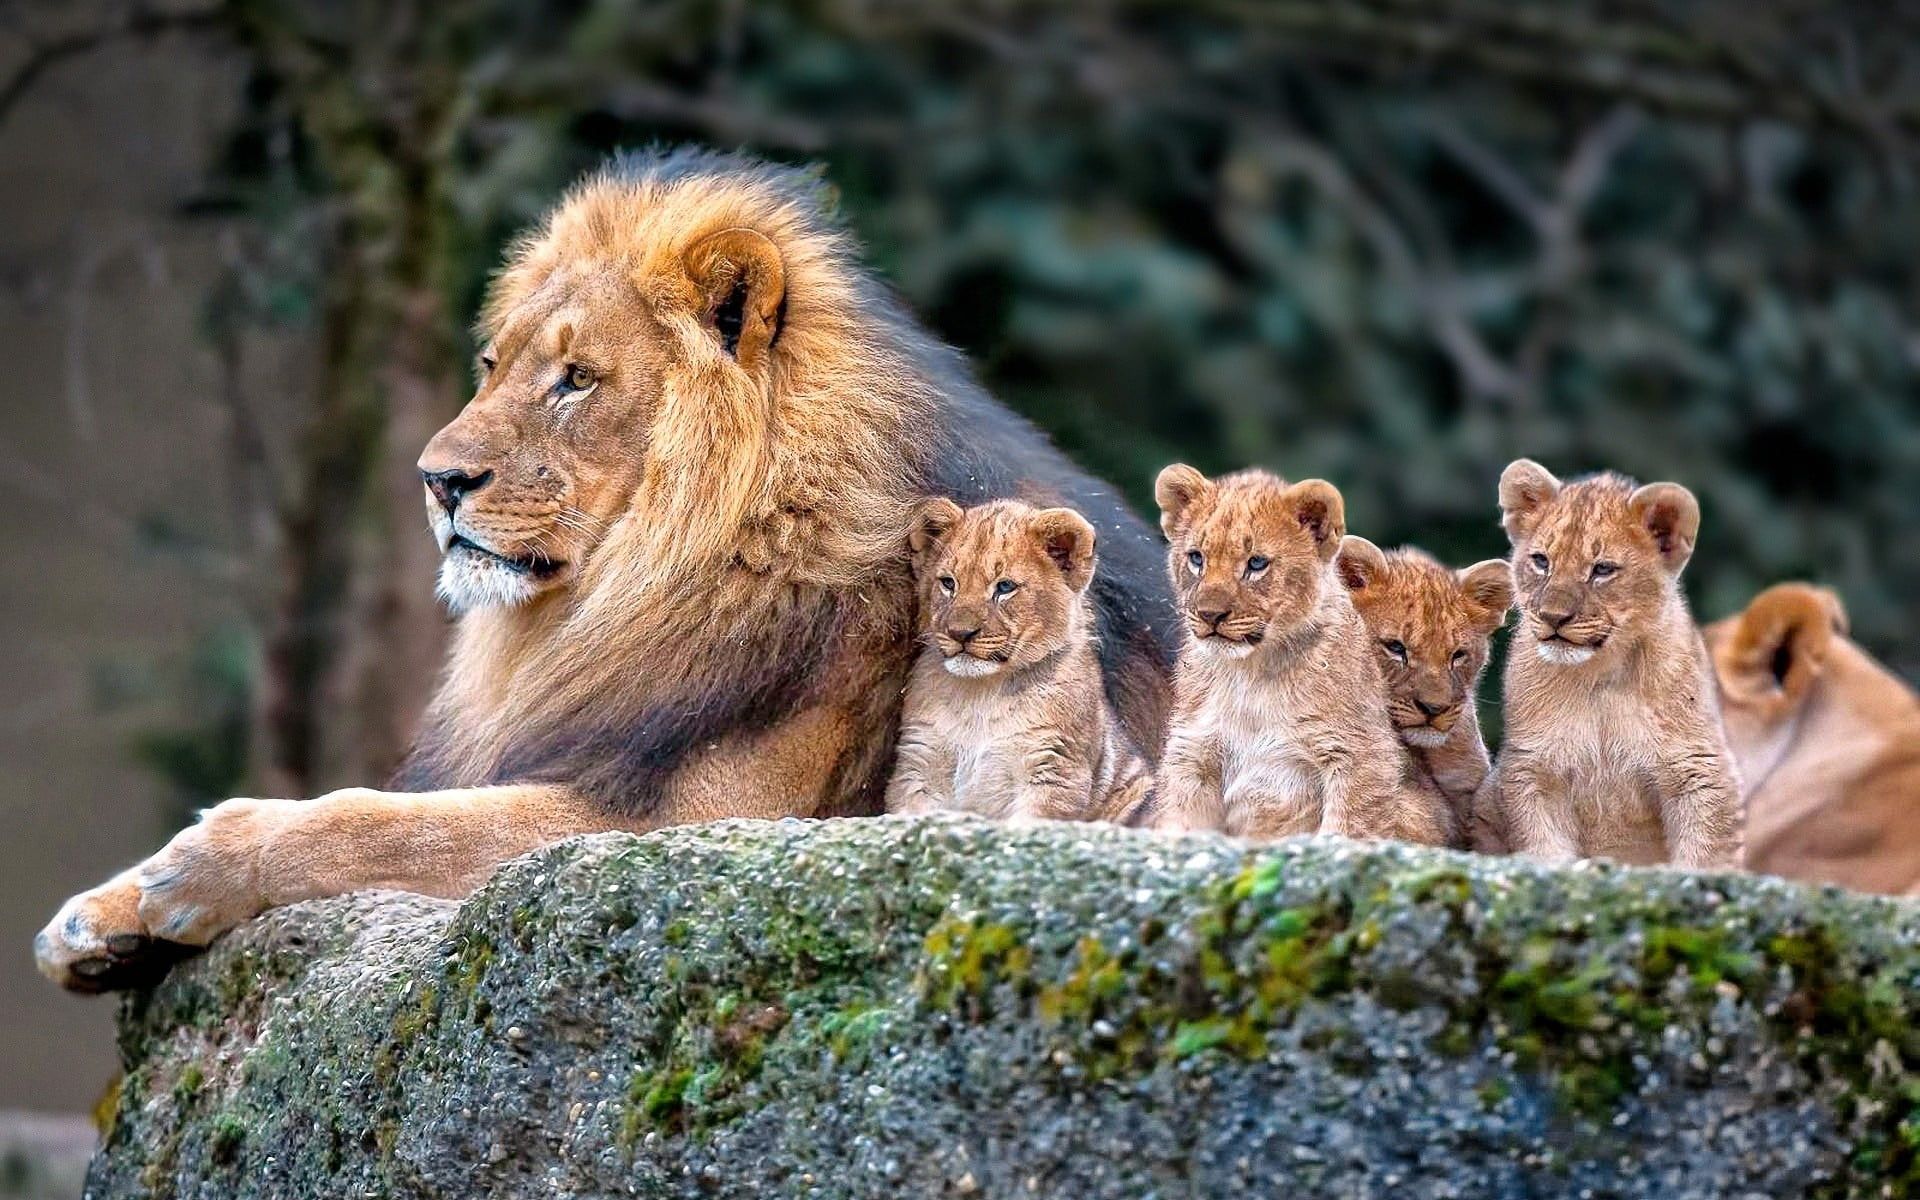 Lion and baby lions, lion, nature, animals, baby animals HD